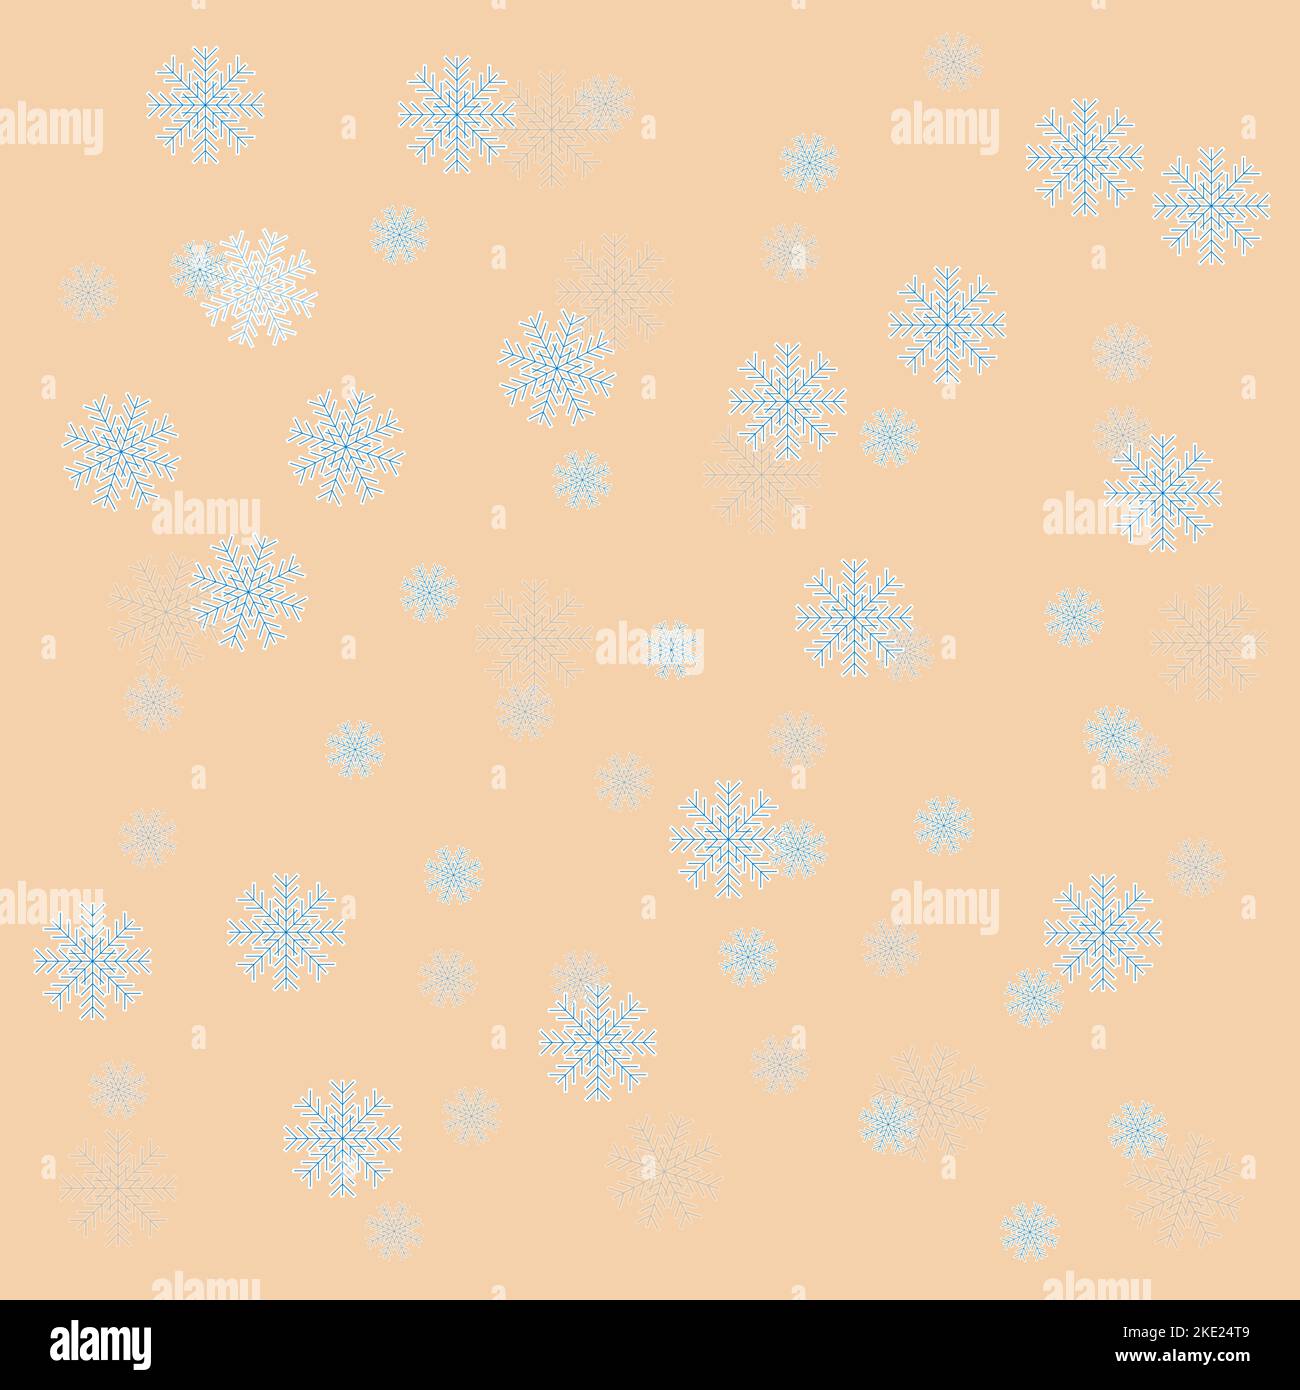 Blue snowflakes of different sizes and transparency on a beige background. Vector illustration, patern. Winter concept. Stock Vector